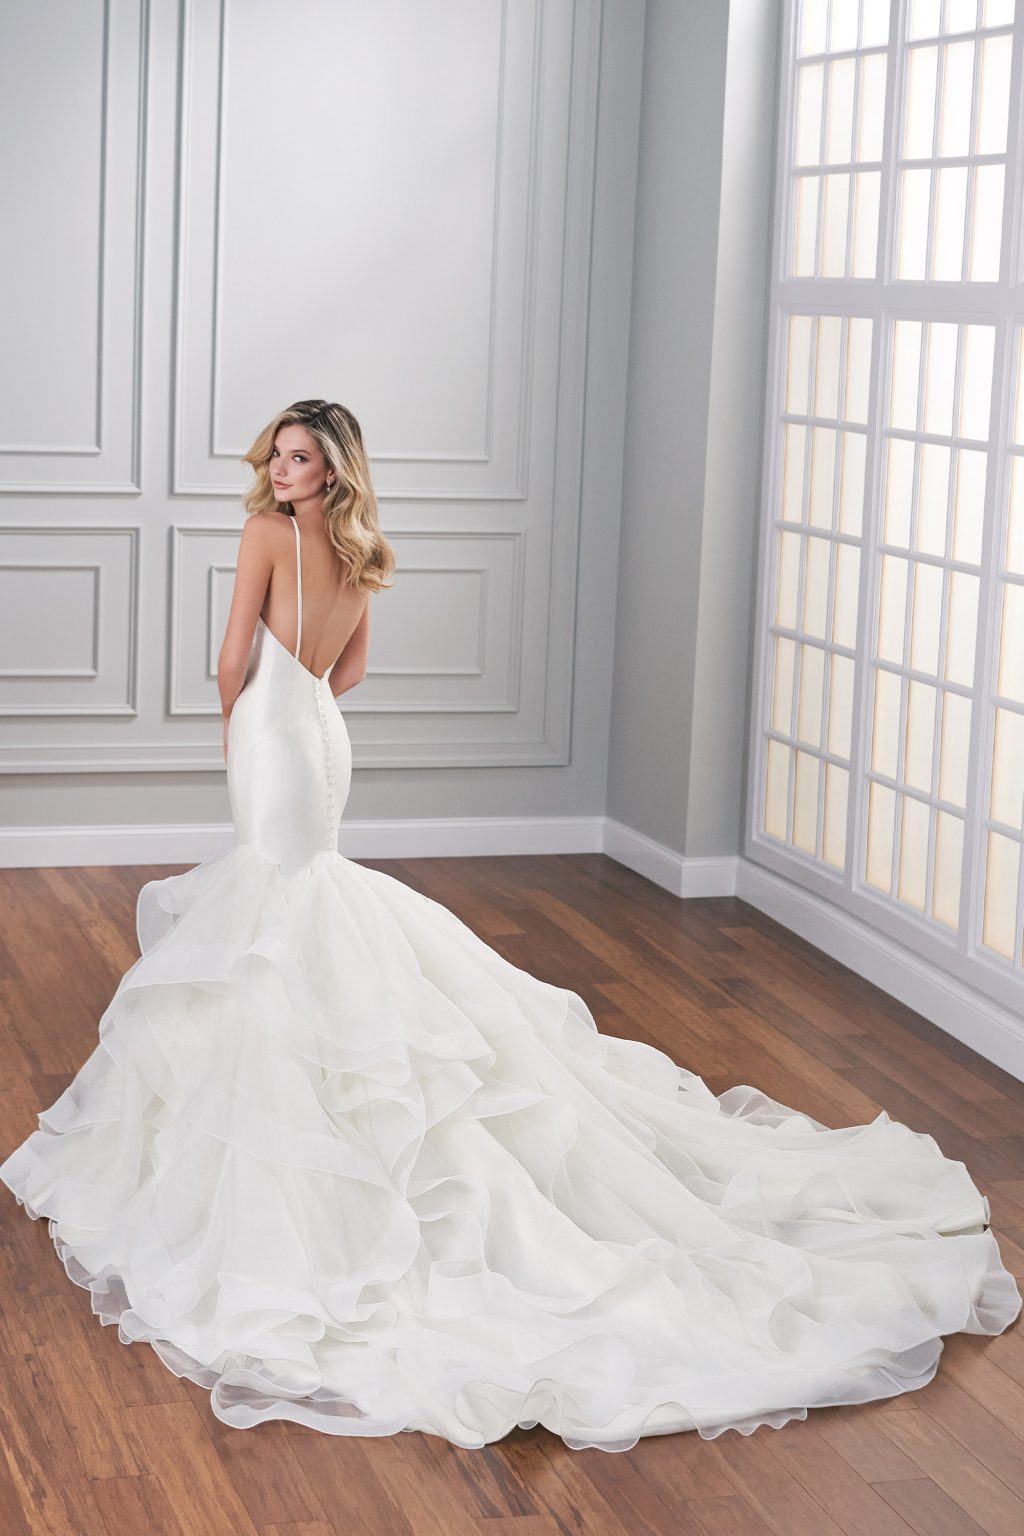 18 Convertible Wedding Dress Styles You Have to See